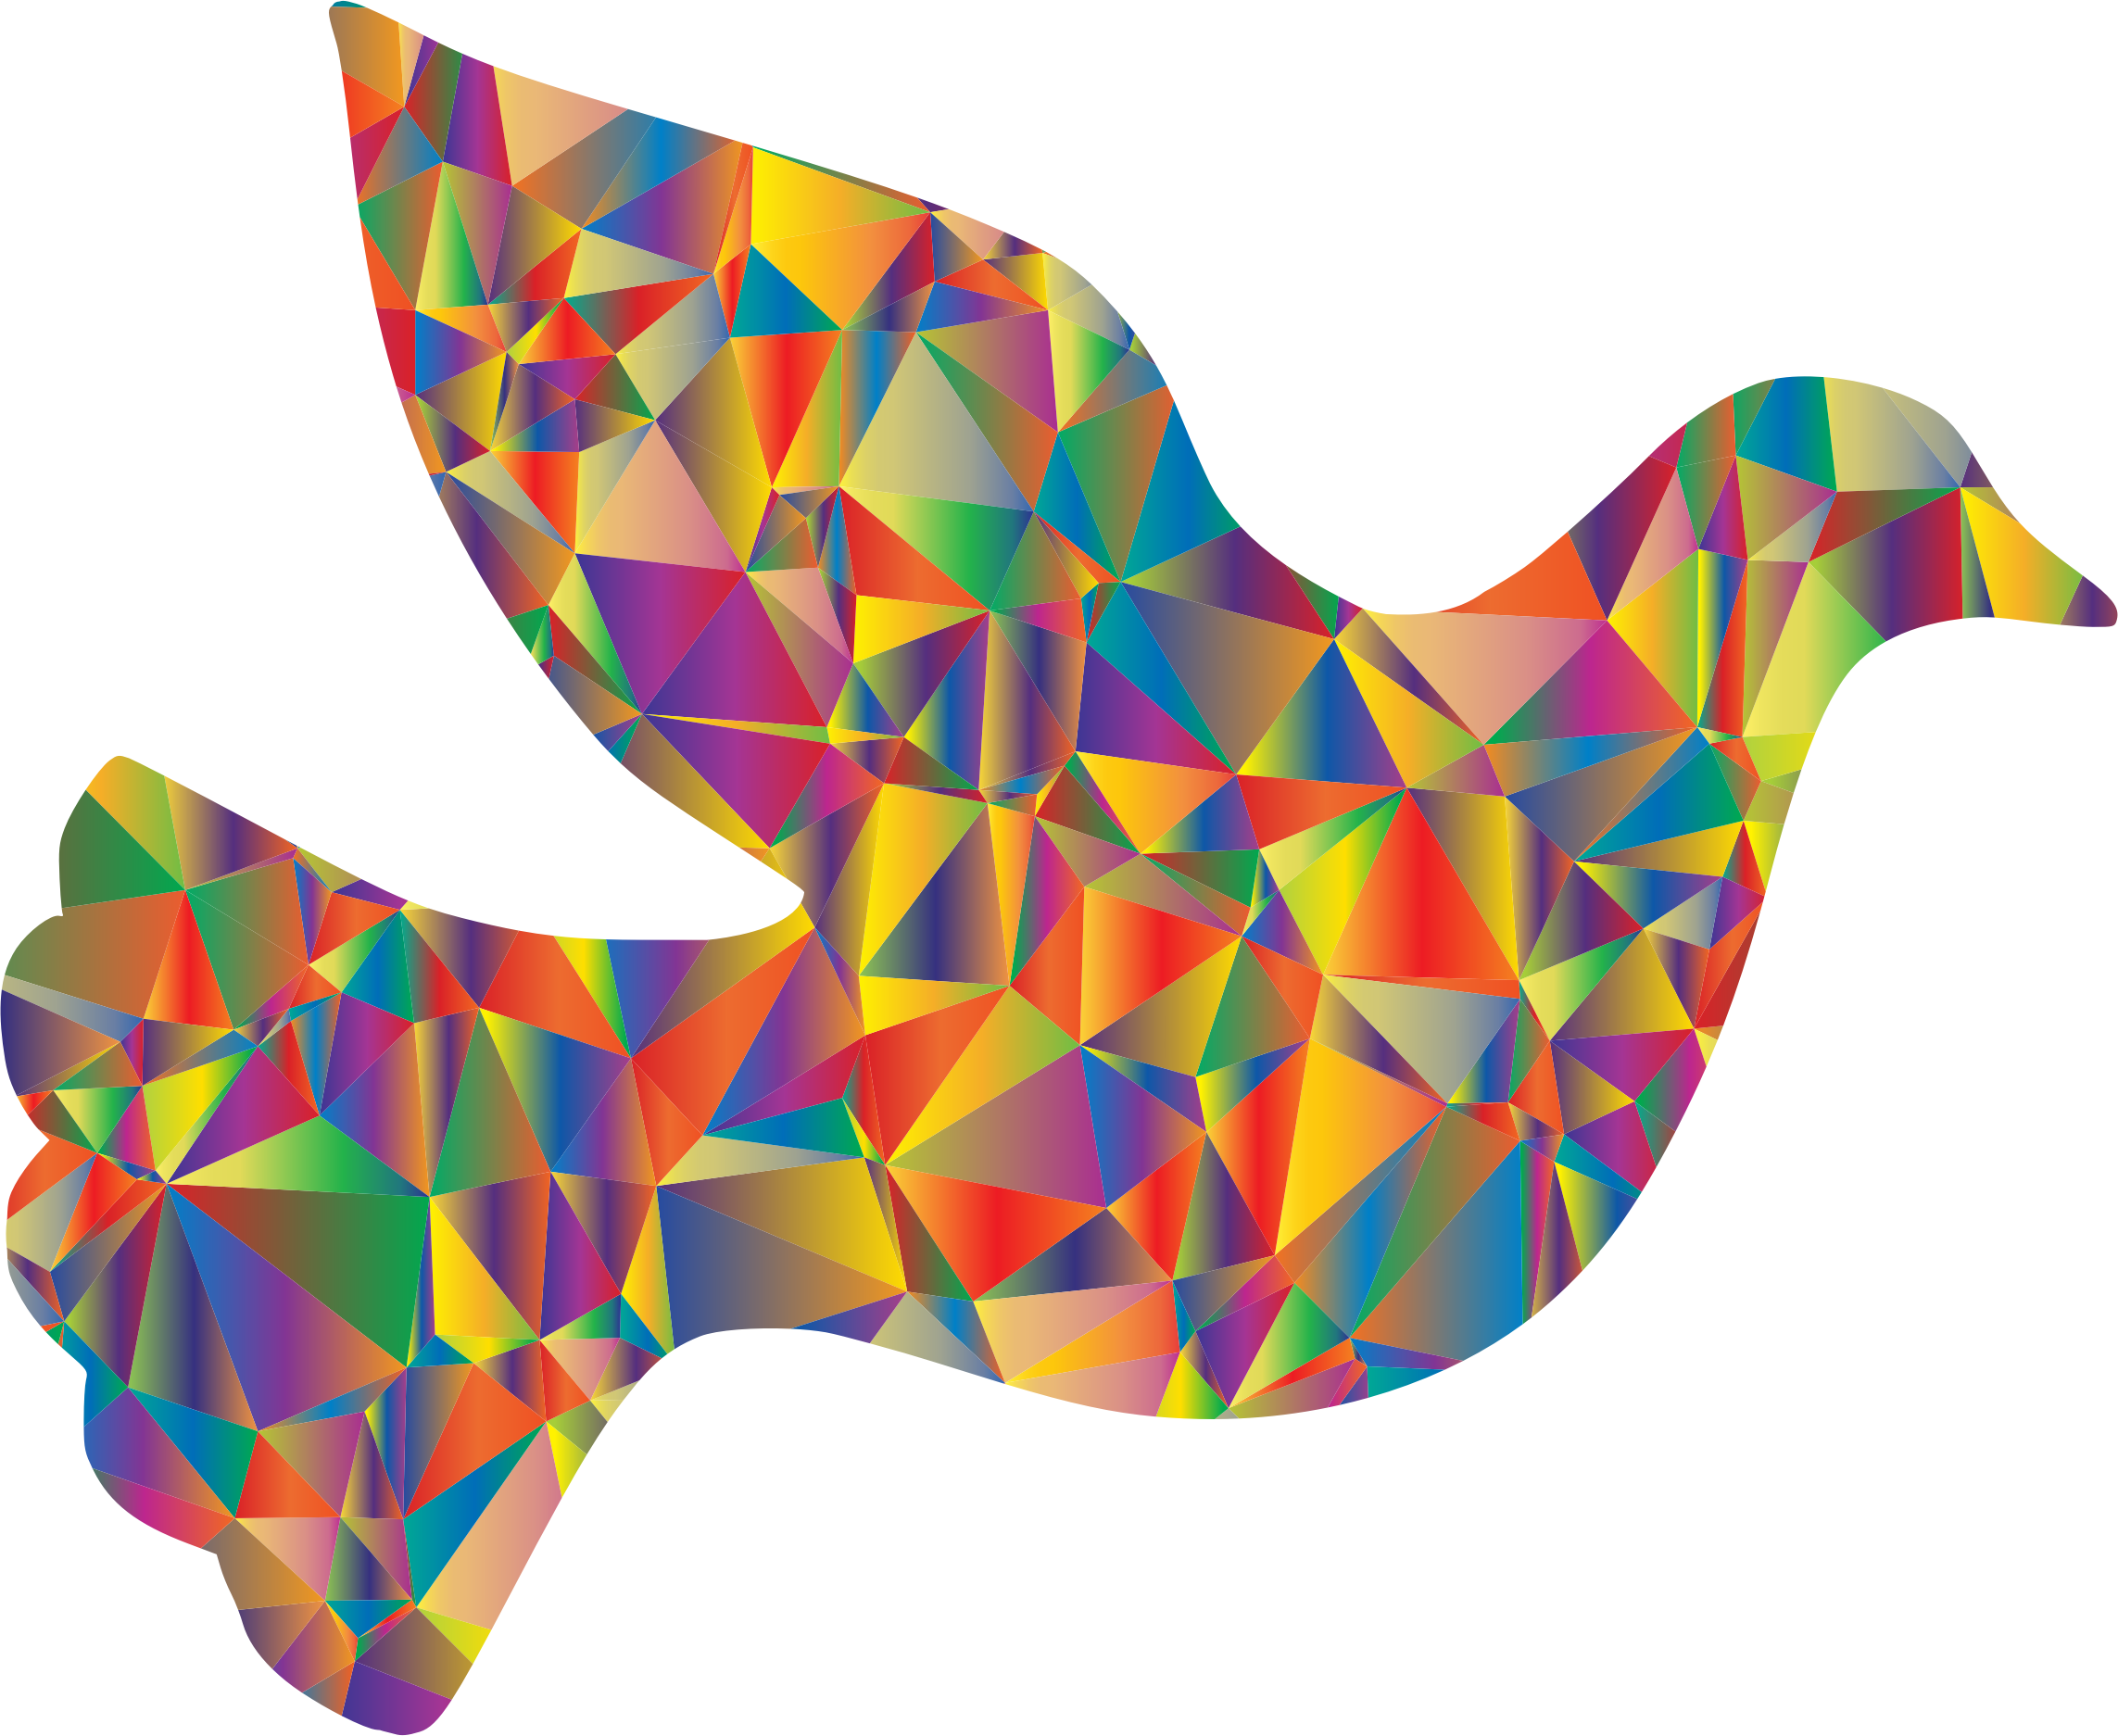 This Free Icons Png Design Of Low Poly Peace Dove - Prismatic Rainbow Howling Wolf Round Ornament (2286x1874)